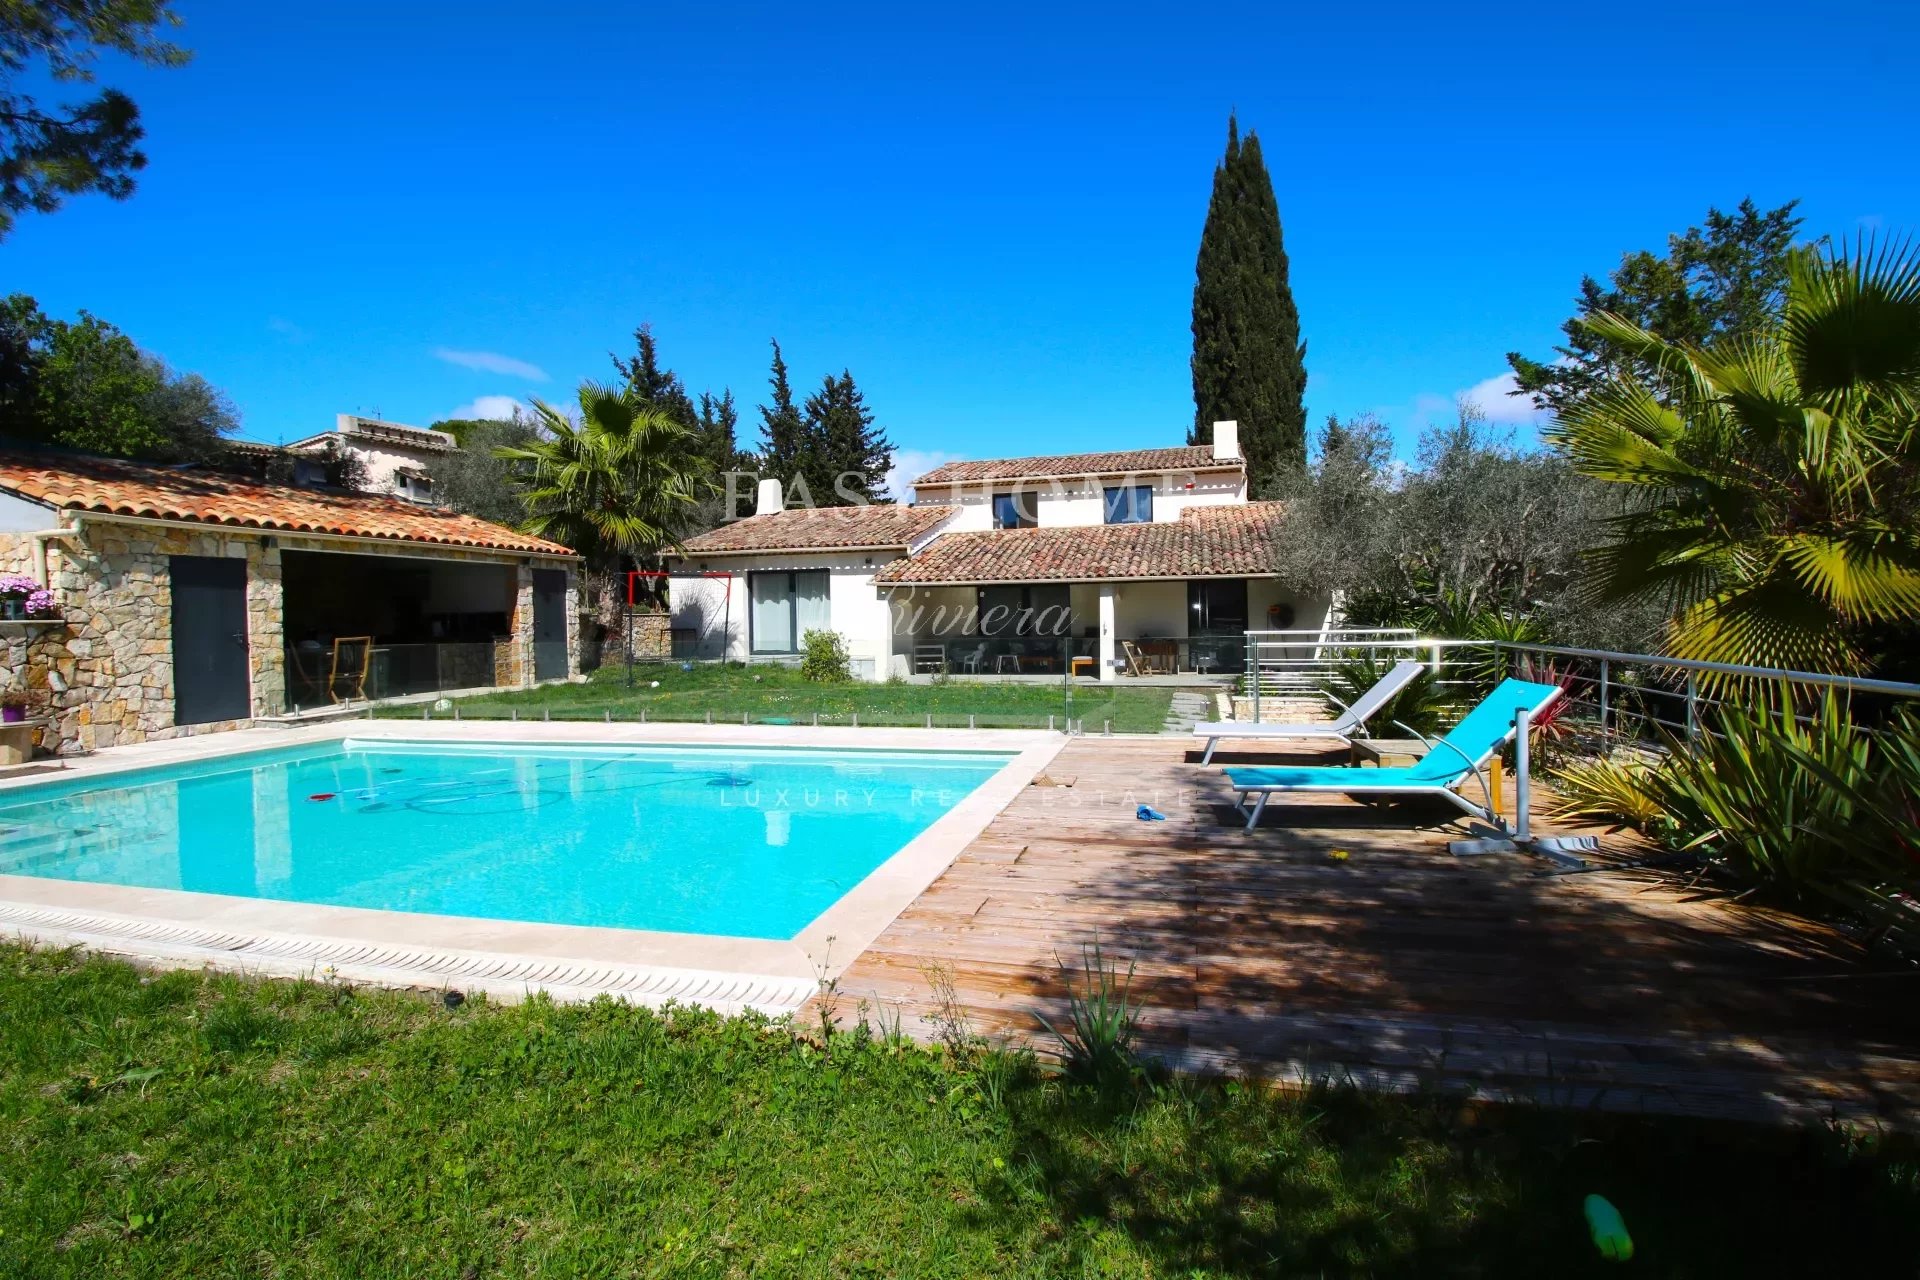 Purchase/Sale Villa Mougins with possibility of building a 2nd villa